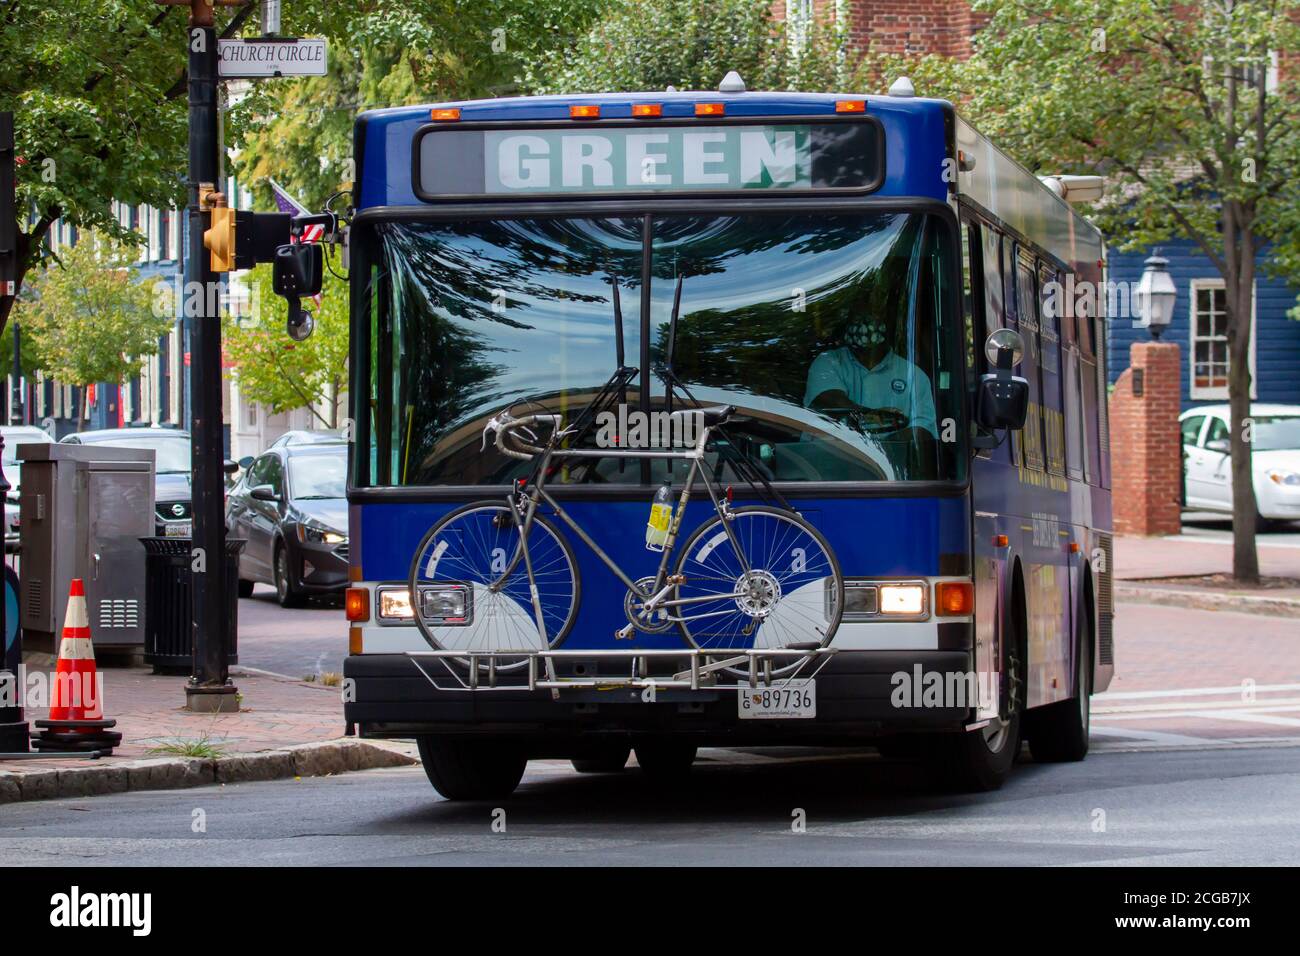 Annapolis, MD, USA 08/25/2020: A blue bus is making a left turn at the traffic lights in downtown Annapolis. The  driver is wearing a face mask. It is Stock Photo